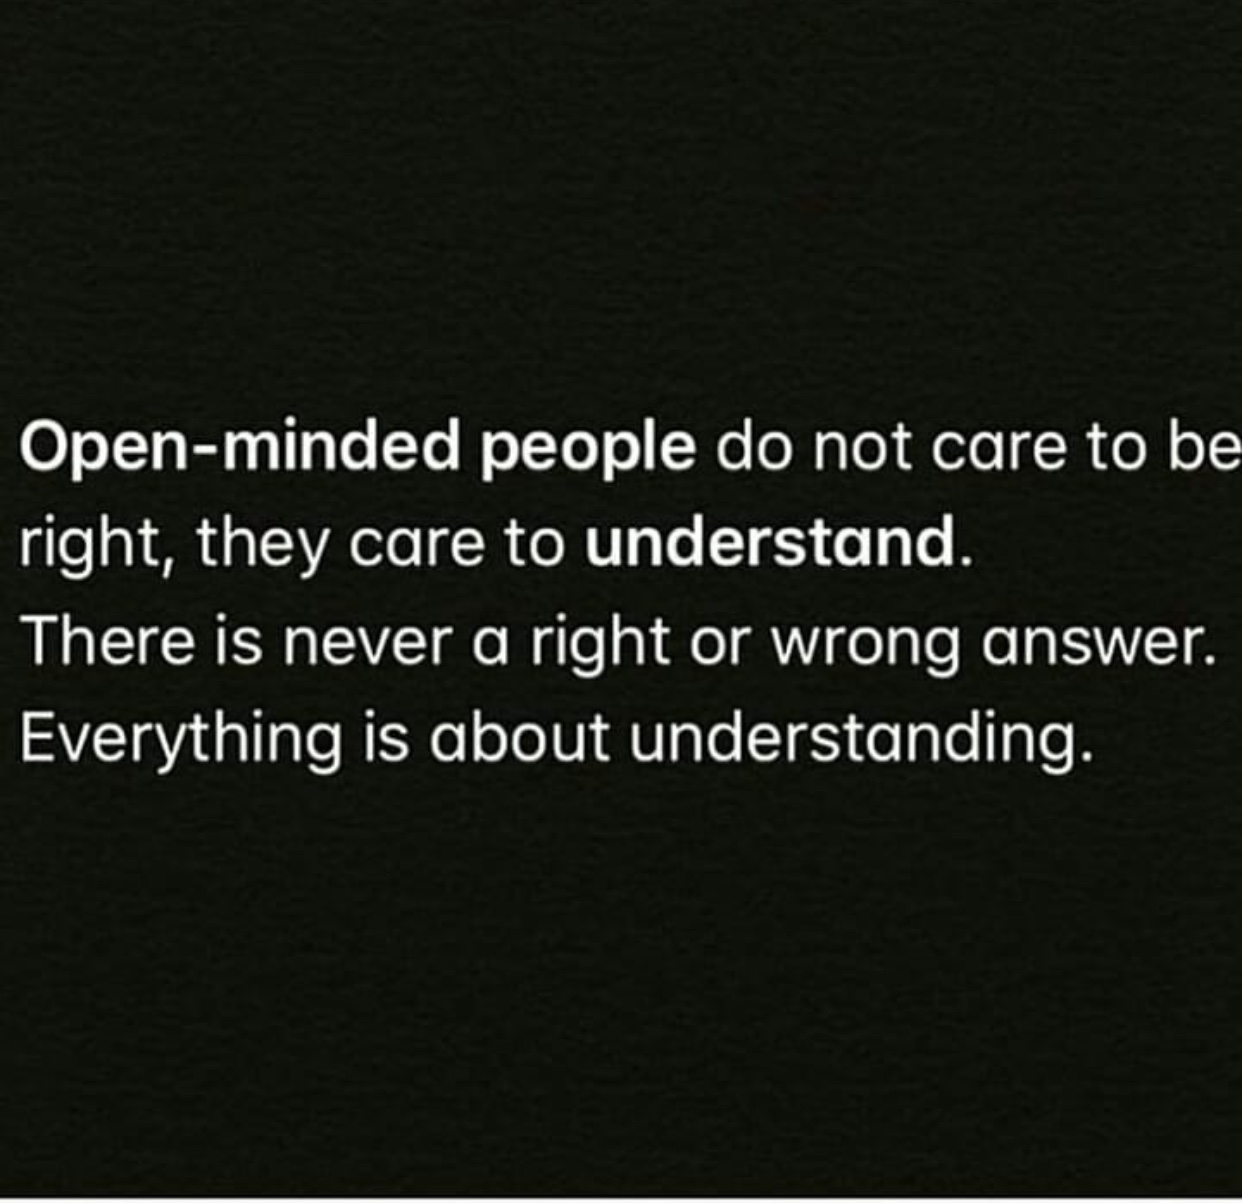 atheism - Openminded people do not care to be right, they care to understand. There is never a right or wrong answer. Everything is about understanding.